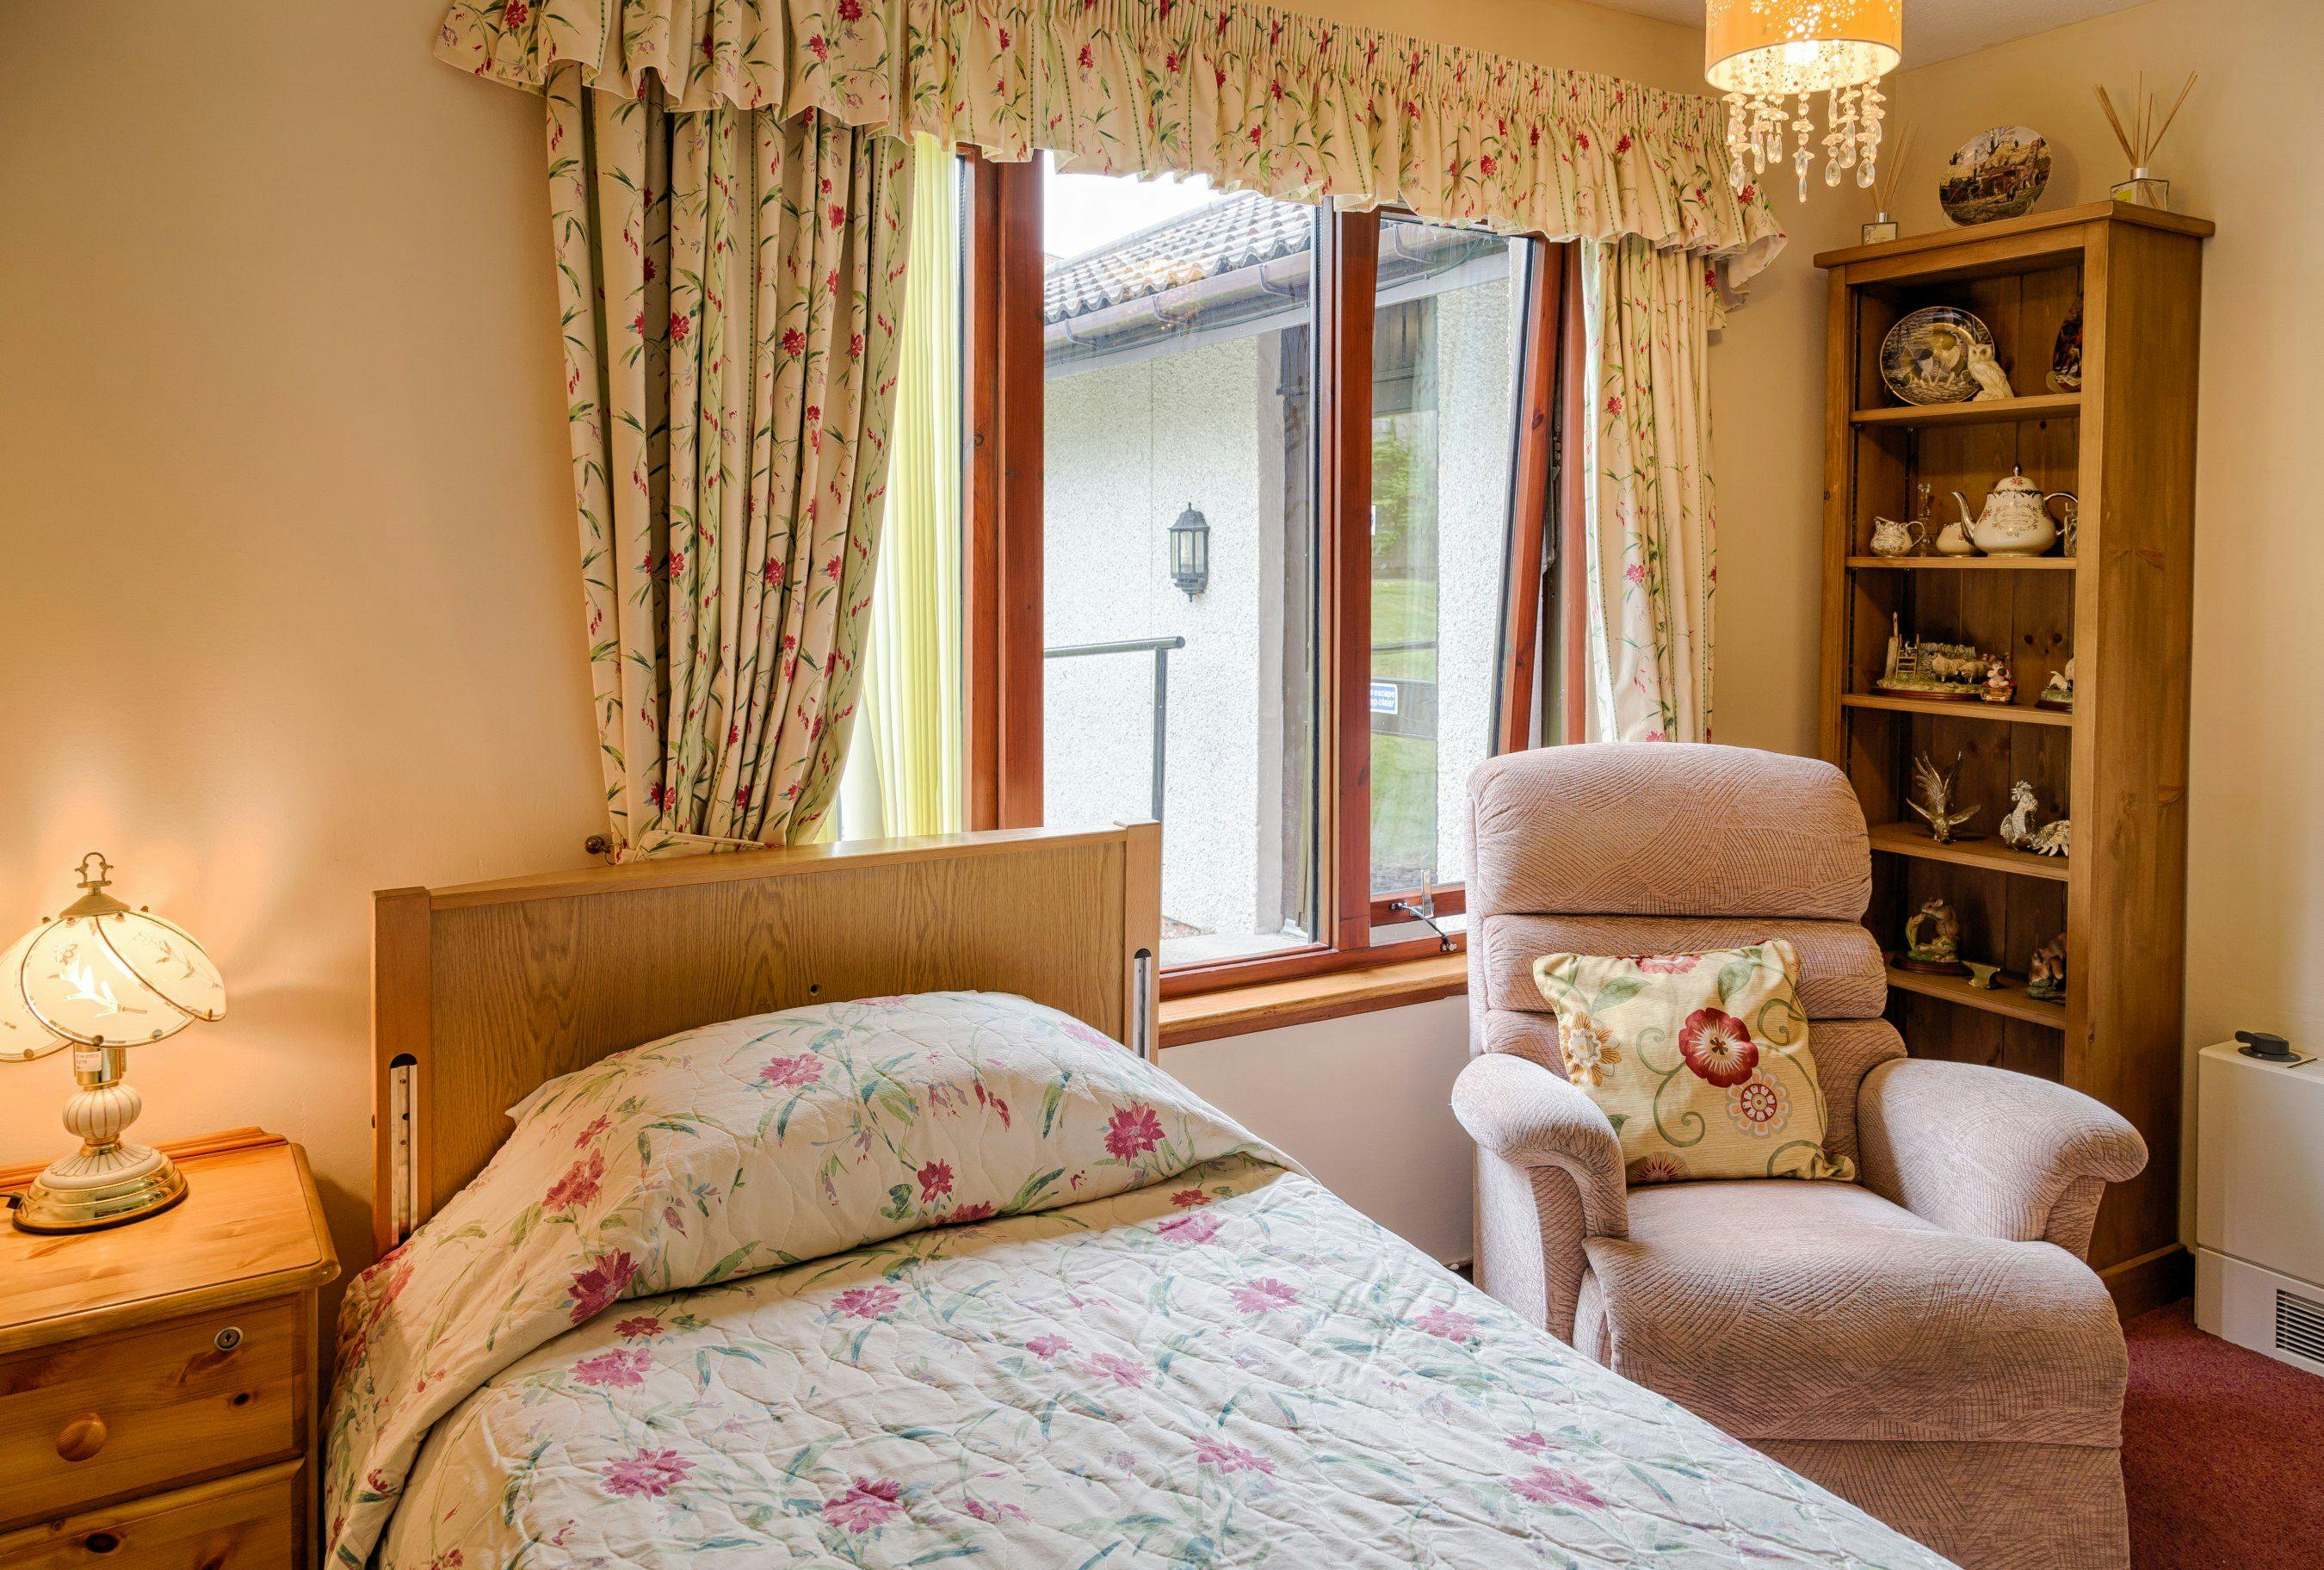 Bedroom at Lethen Park Care Home in Aberdeen, Scotland